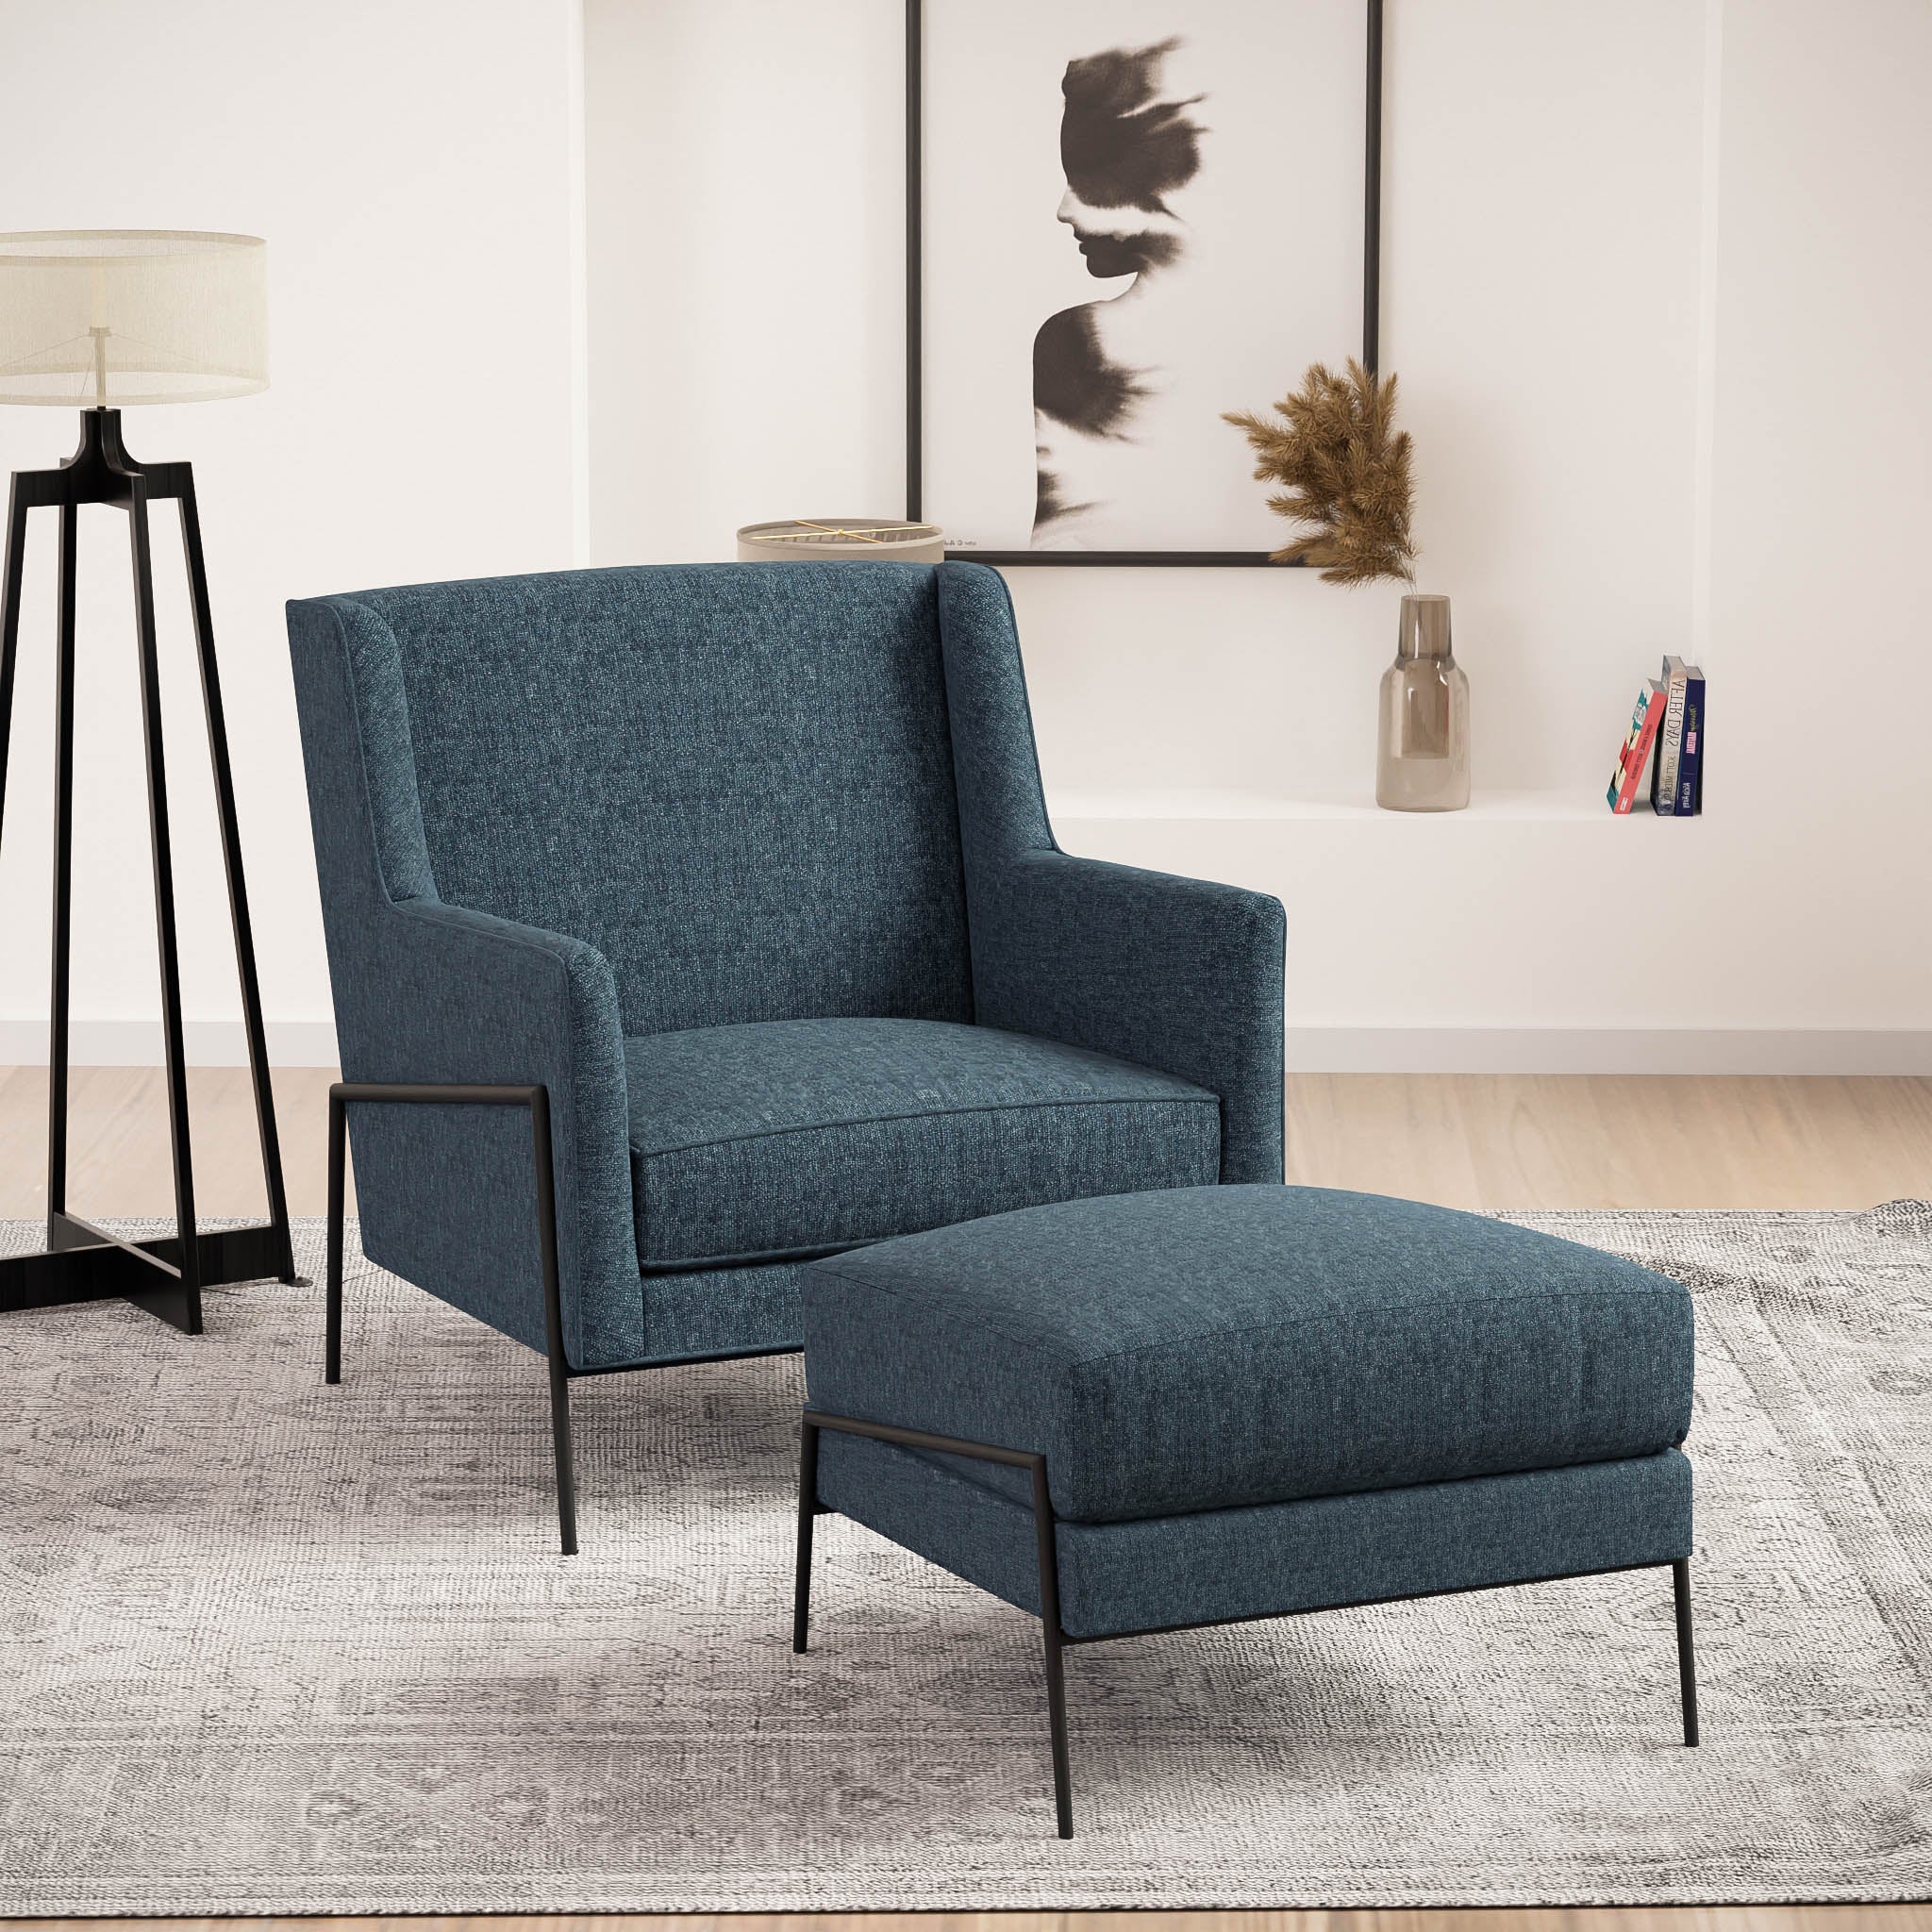 Interiors by Steven G. Skirted Accent Chair | 89% Off | Kaiyo